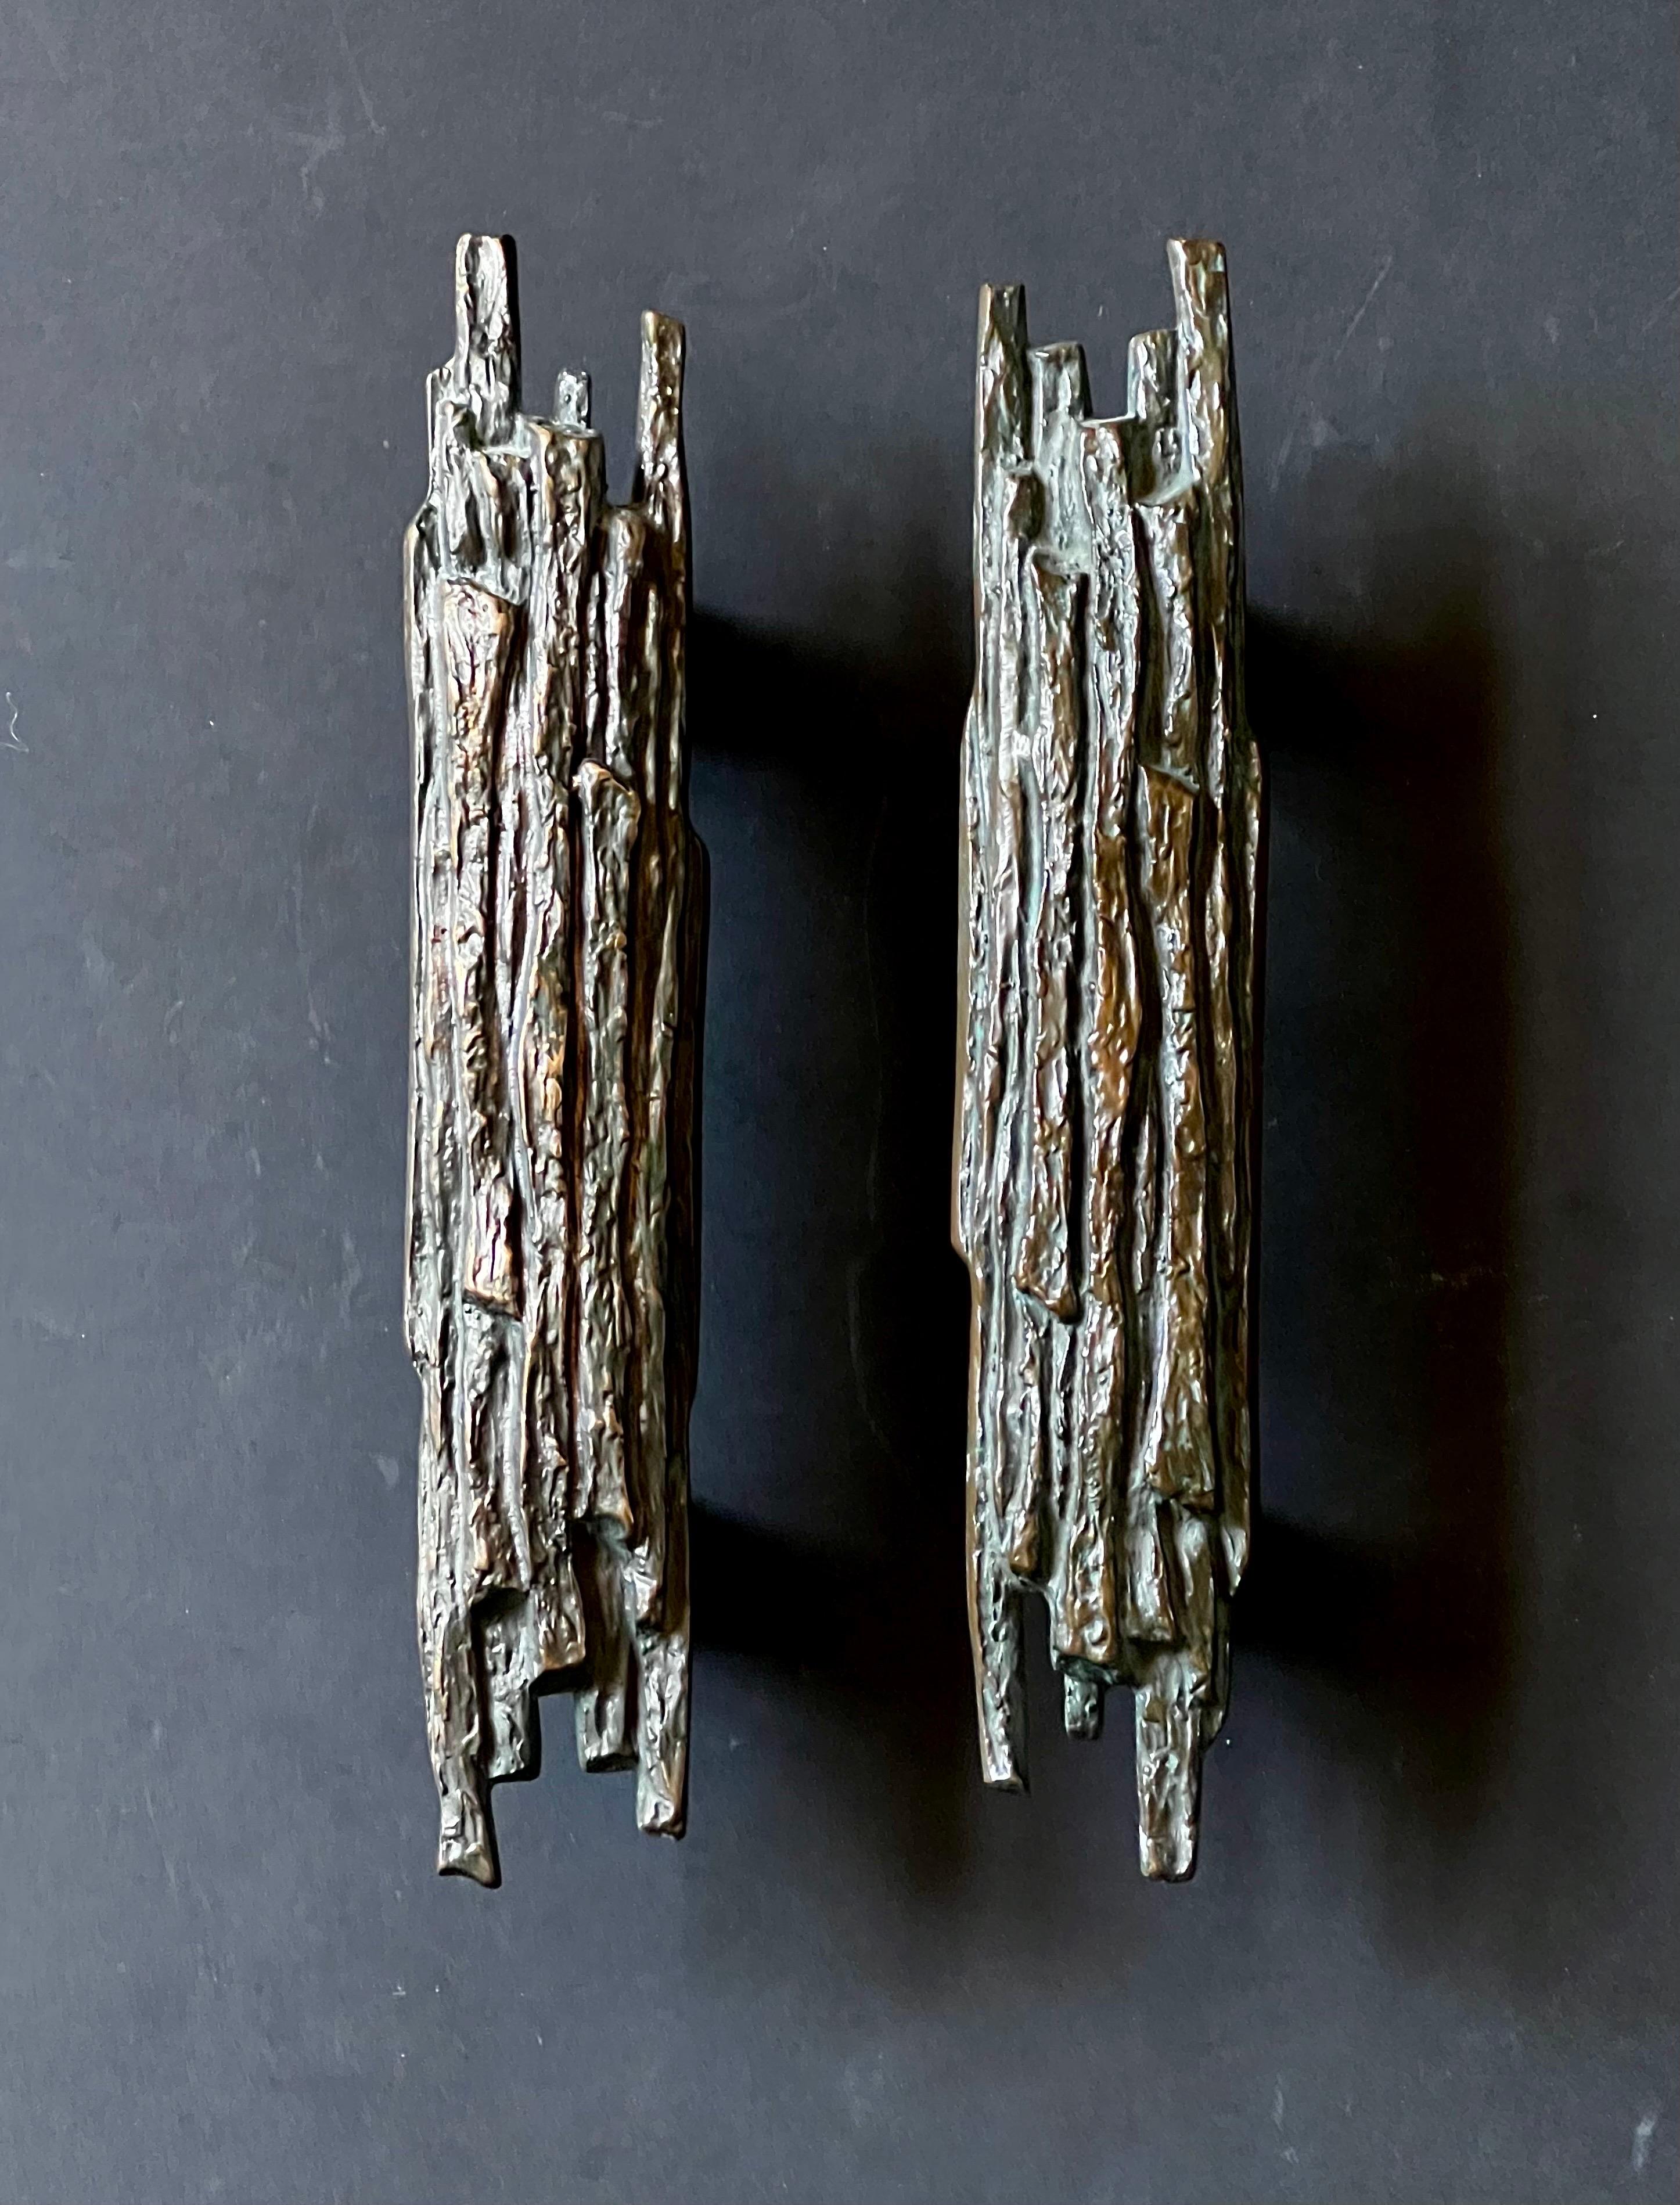 A set of two narrow bronze pull-or-push door handles, with raised pattern of tree bark. Mid-to-late 20th century, European.

The two pieces are of the same design, made of cast bronze. The metal has very nice changing tones from use, from very deep